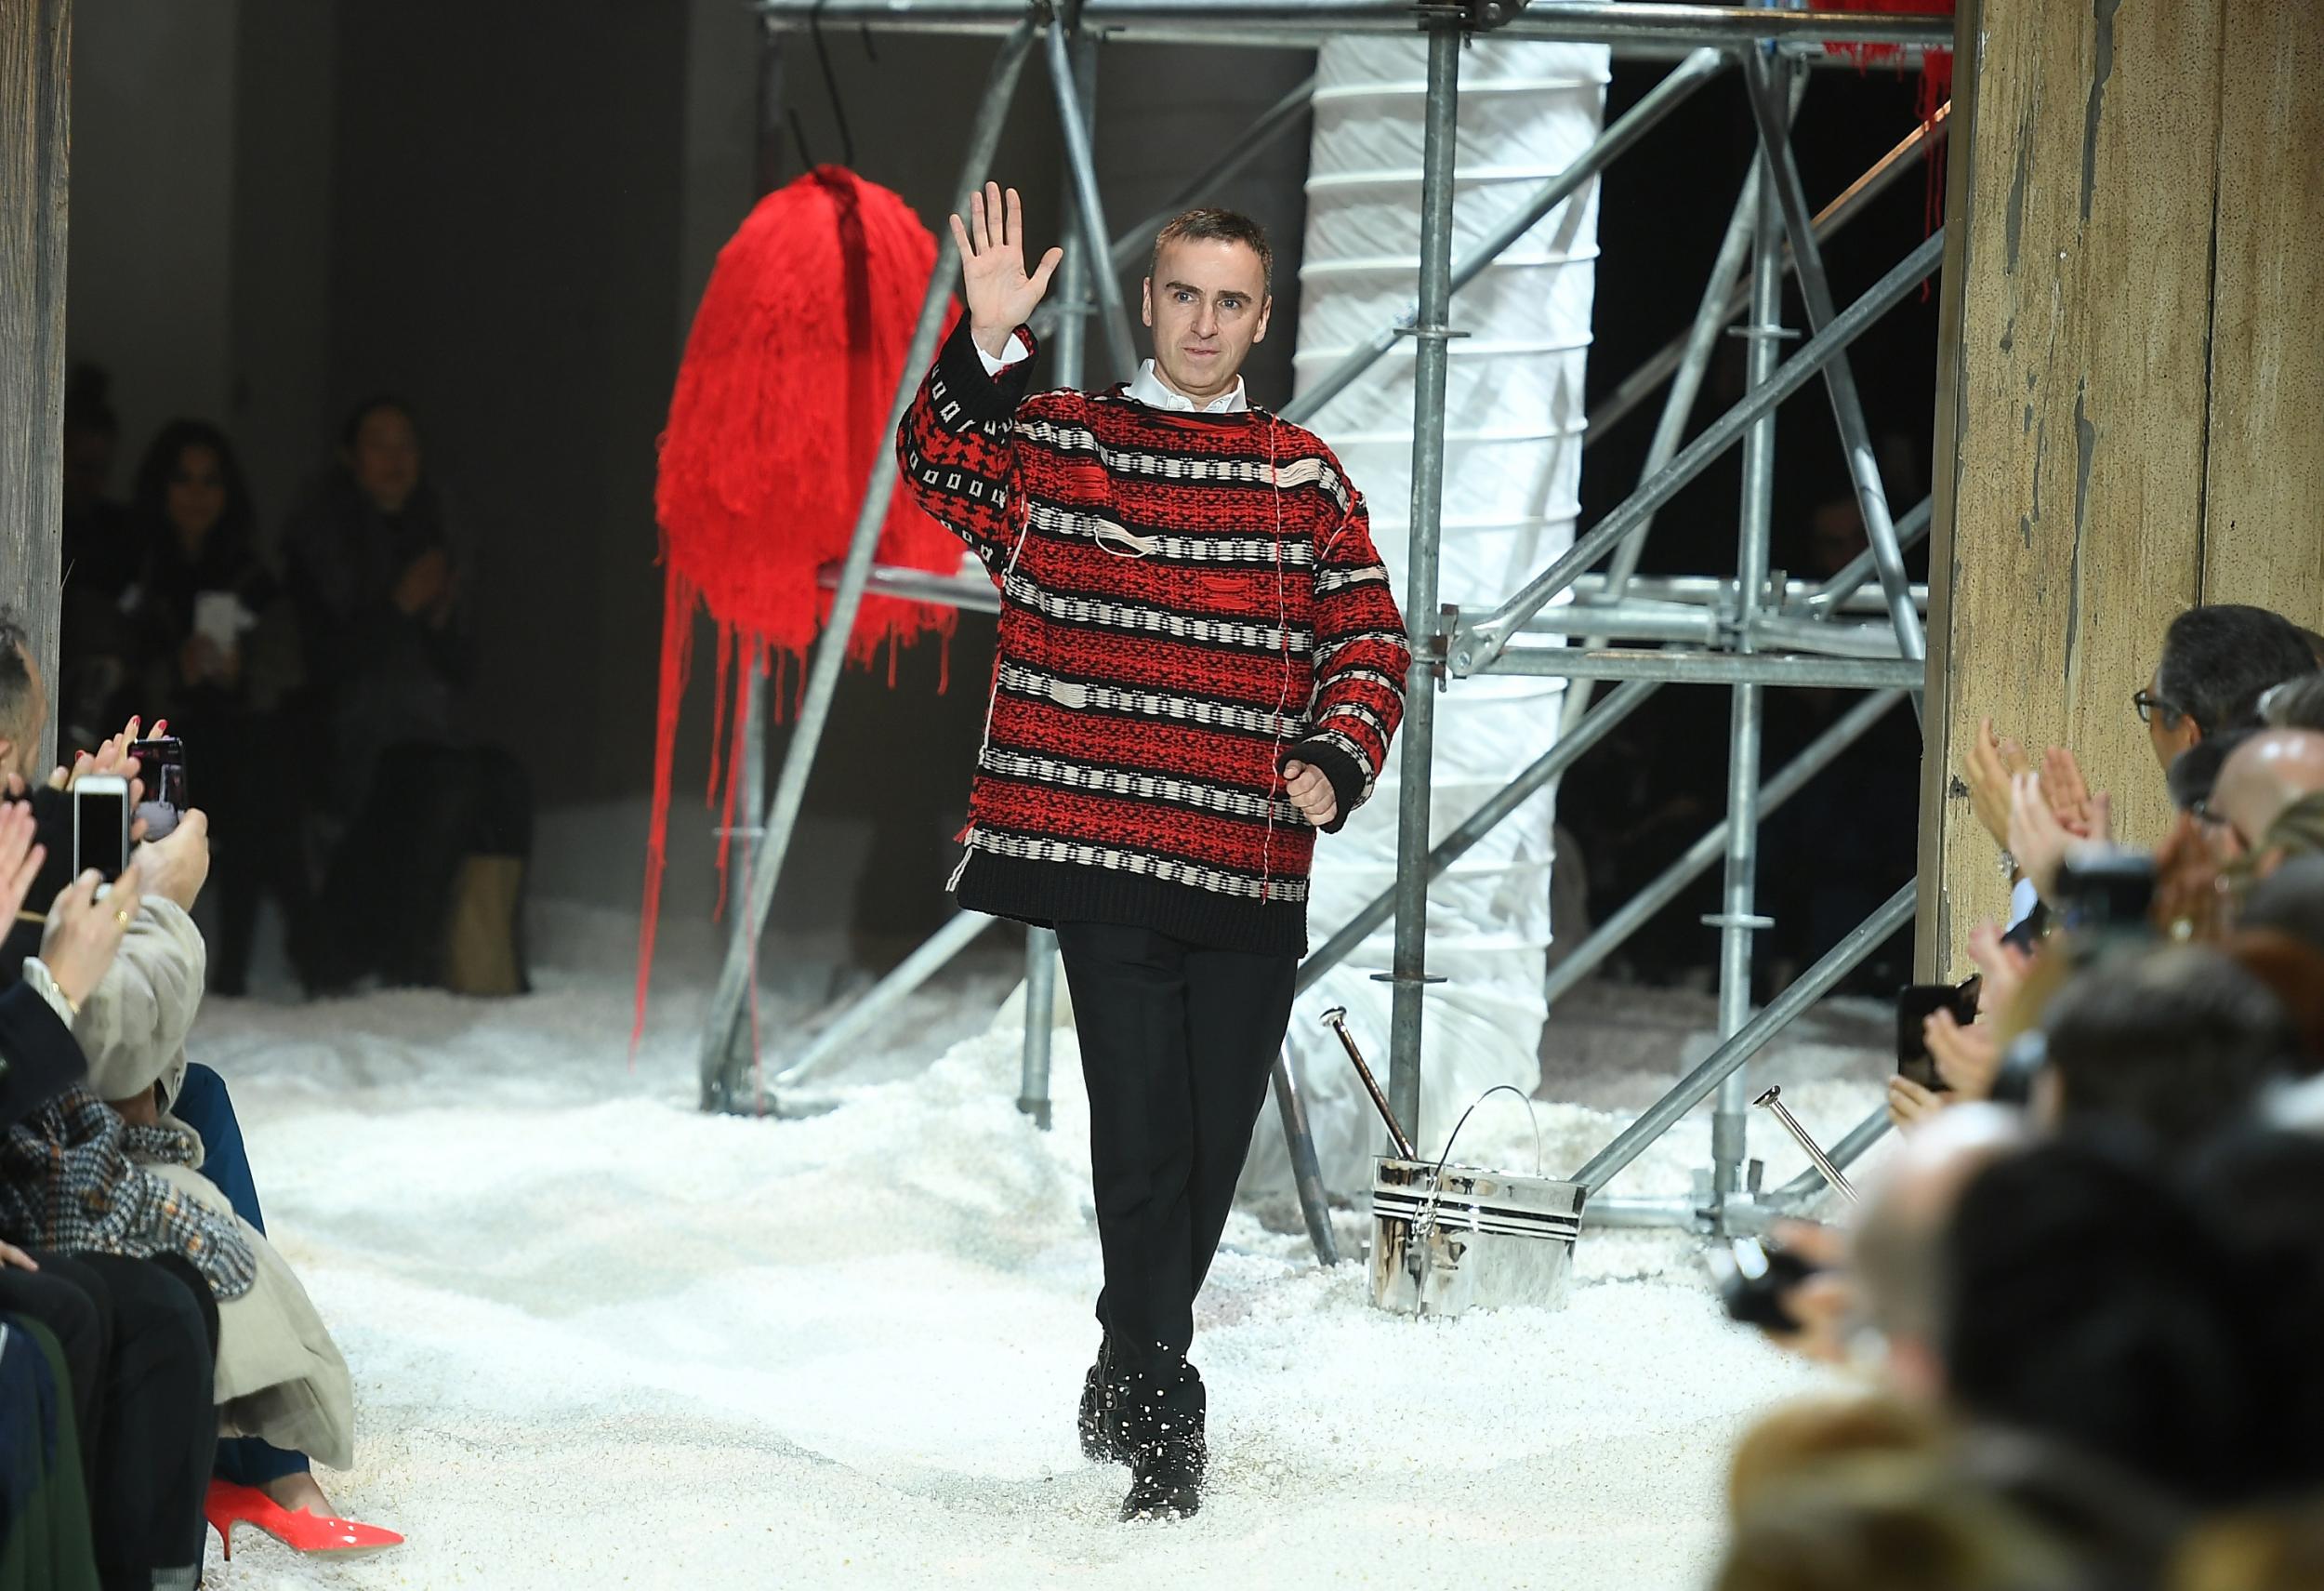 Calvin Klein will not be present at New York Fashion Week in February after announcing CEO Raf Simons is stepping down